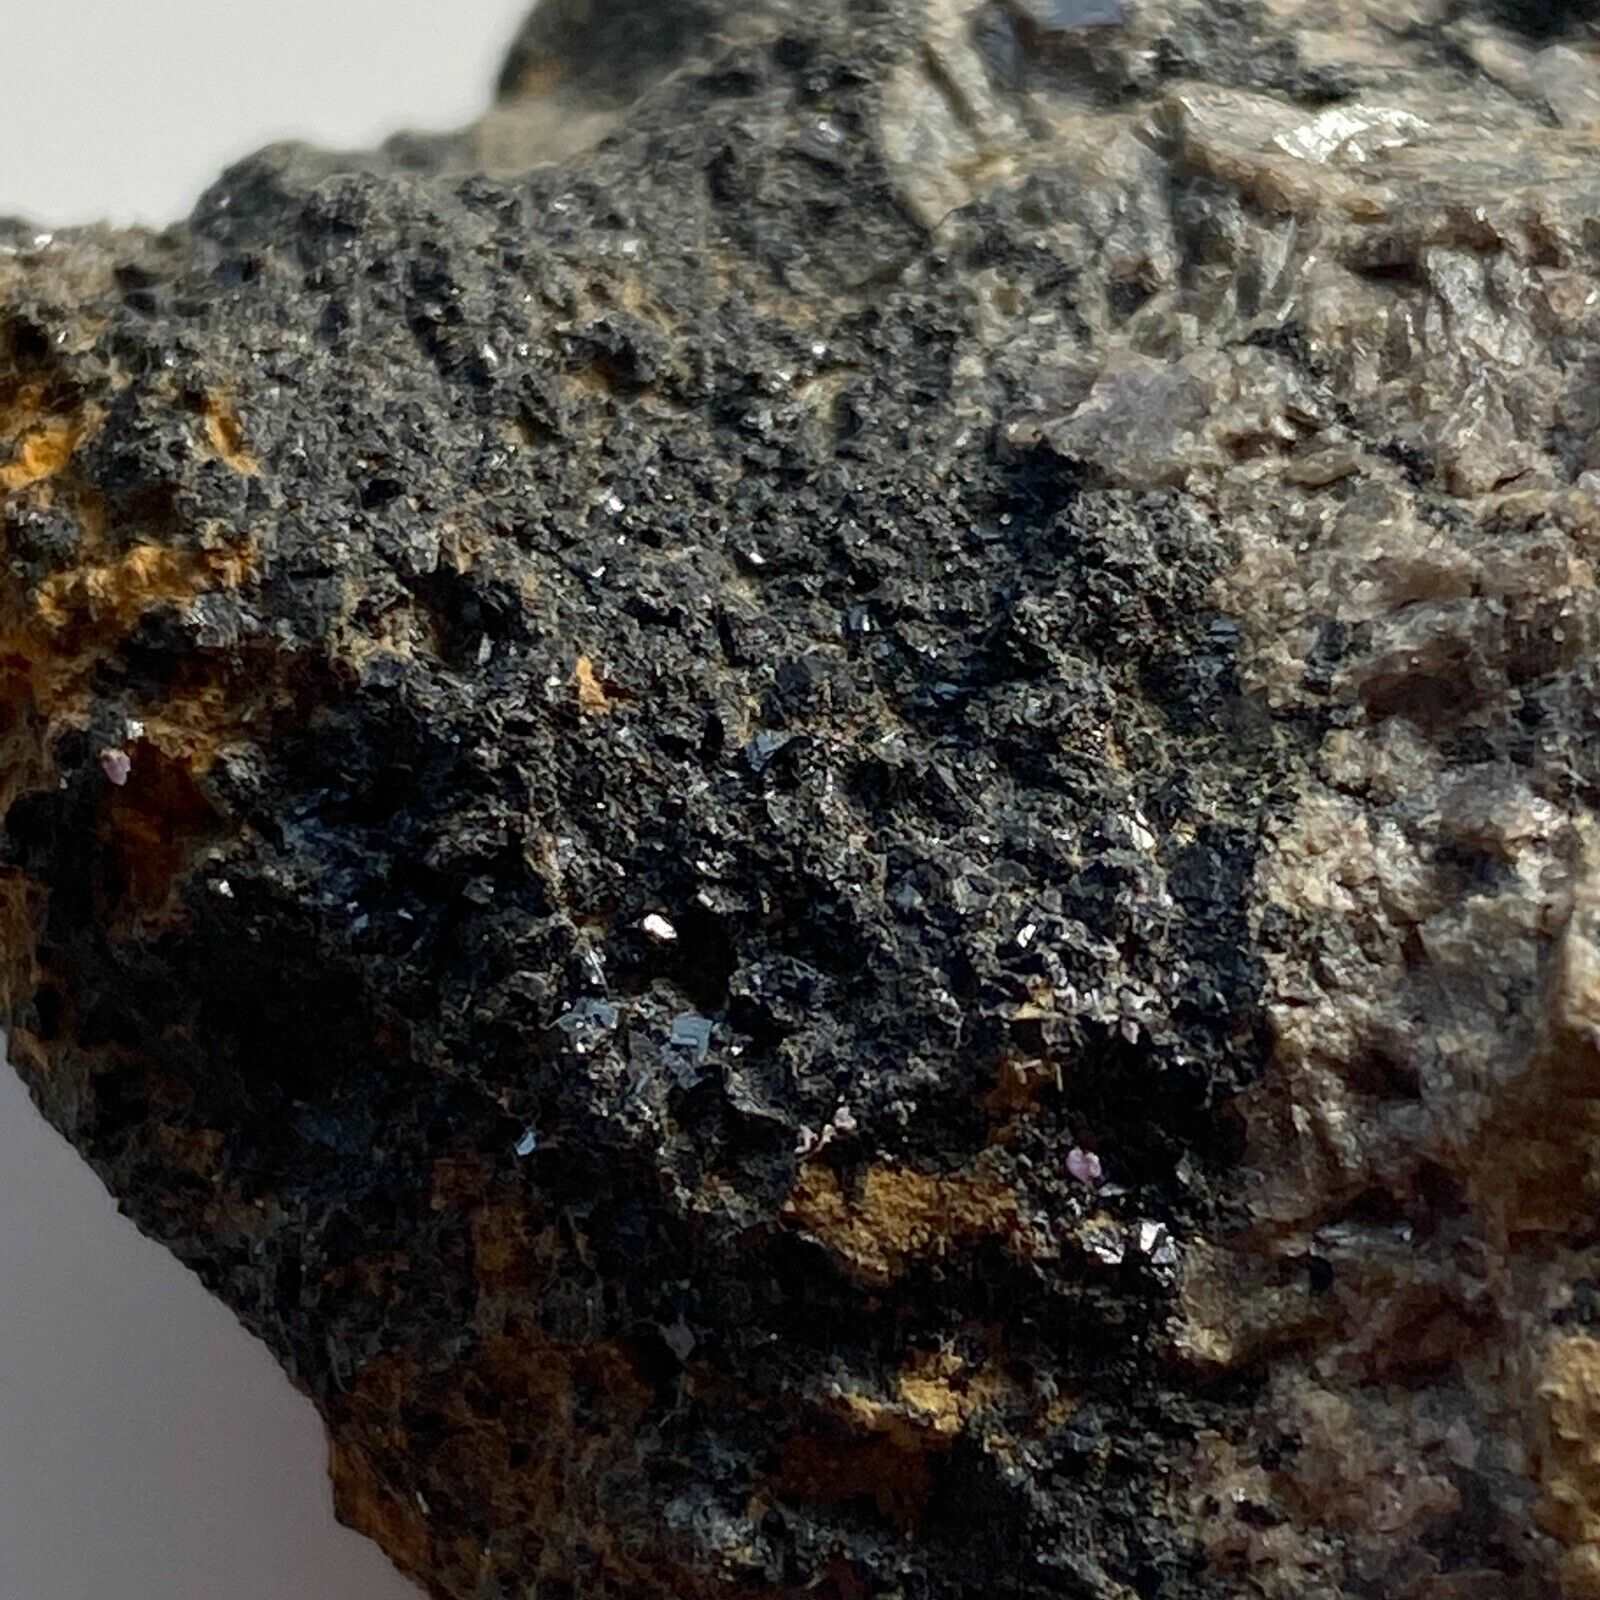 AXINITE ON MATRIX FROM BOTALLACK, ST JUST, CORNWALL  152g  MF258